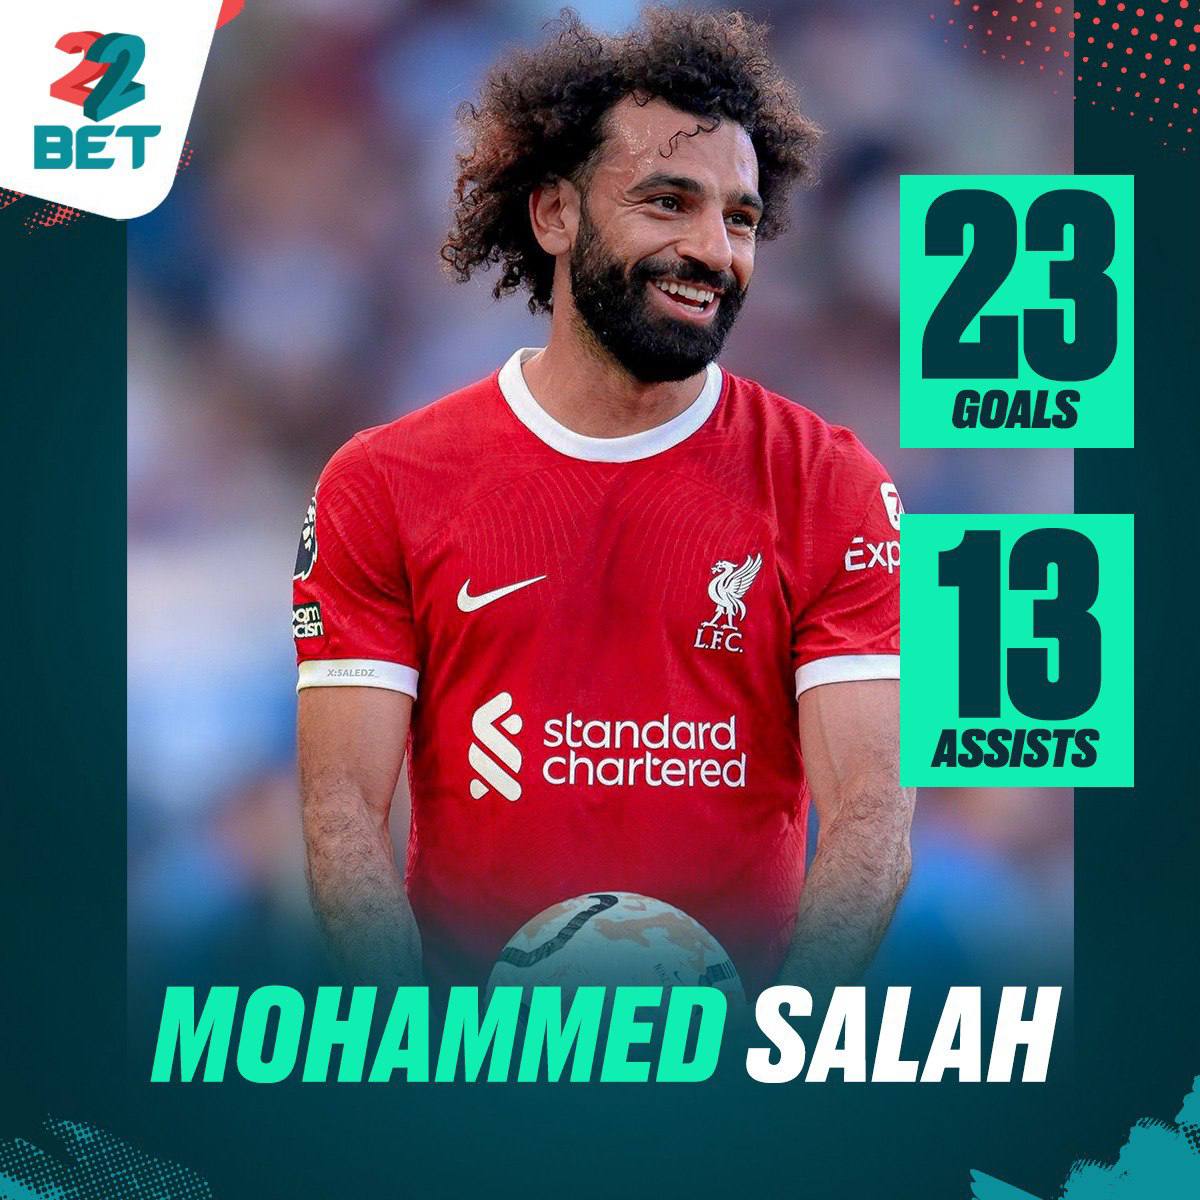 🔴 Mo Salah of Egypt just netted his 209th goal for Liverpool! ⚽️ That's a remarkable feat! Plus, he's scored a whopping 11 goals against #ManUnited in the #PremierLeague, making him the top scorer against them. 🥇 Don't miss out on the action! Visit 22Bet.com…